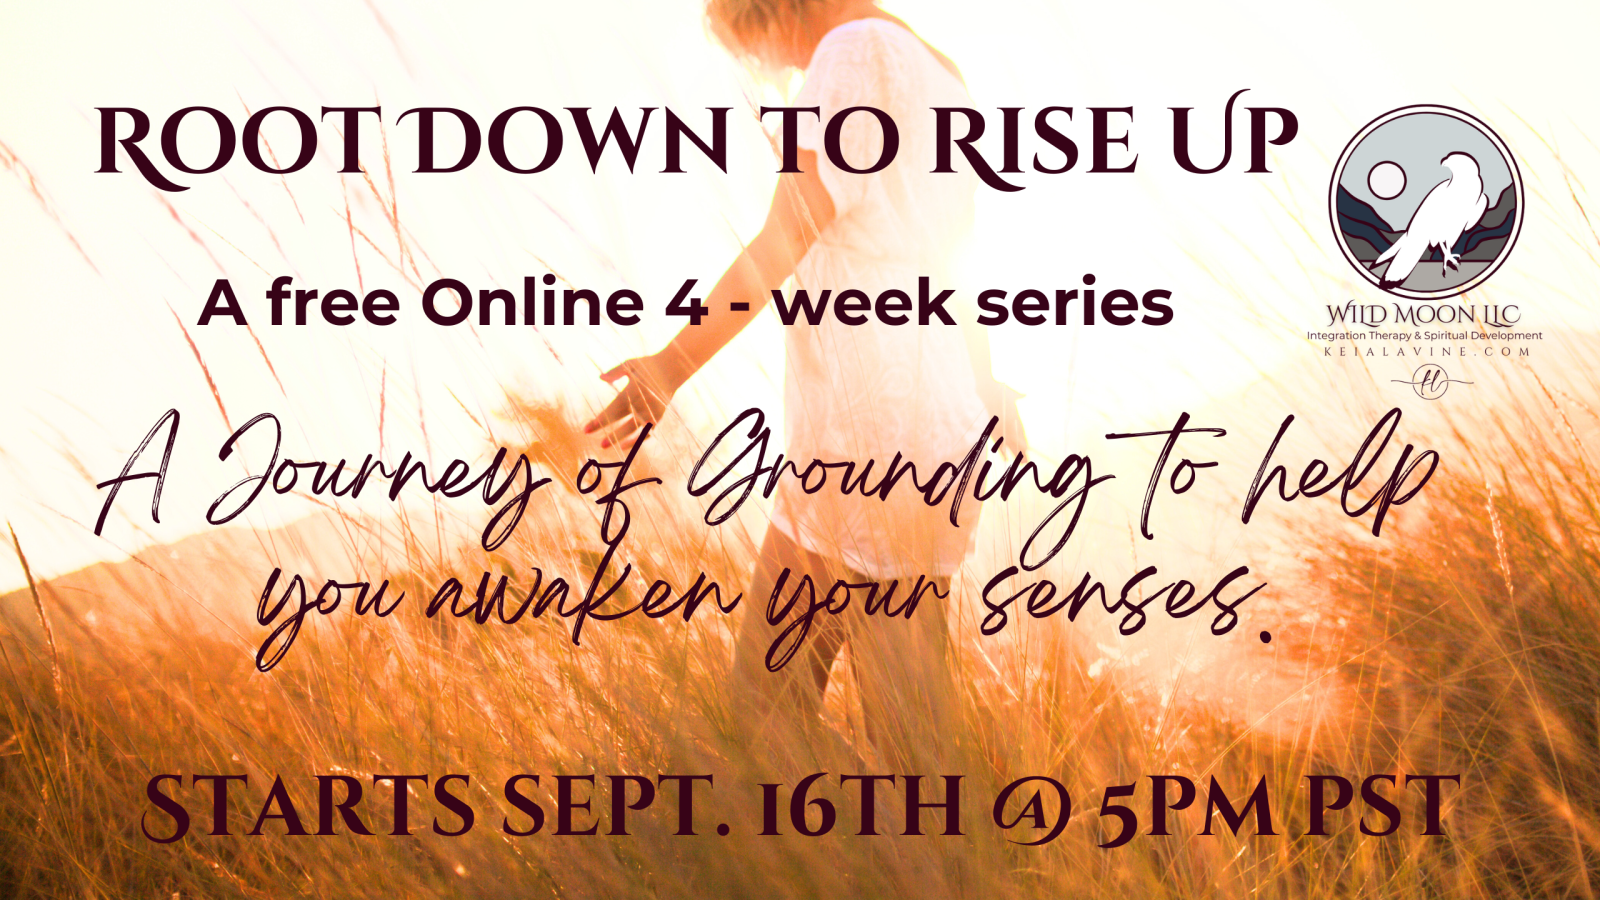 🌱 ROOT TO RISE: A JOURNEY INTO GROUNDING 🌳